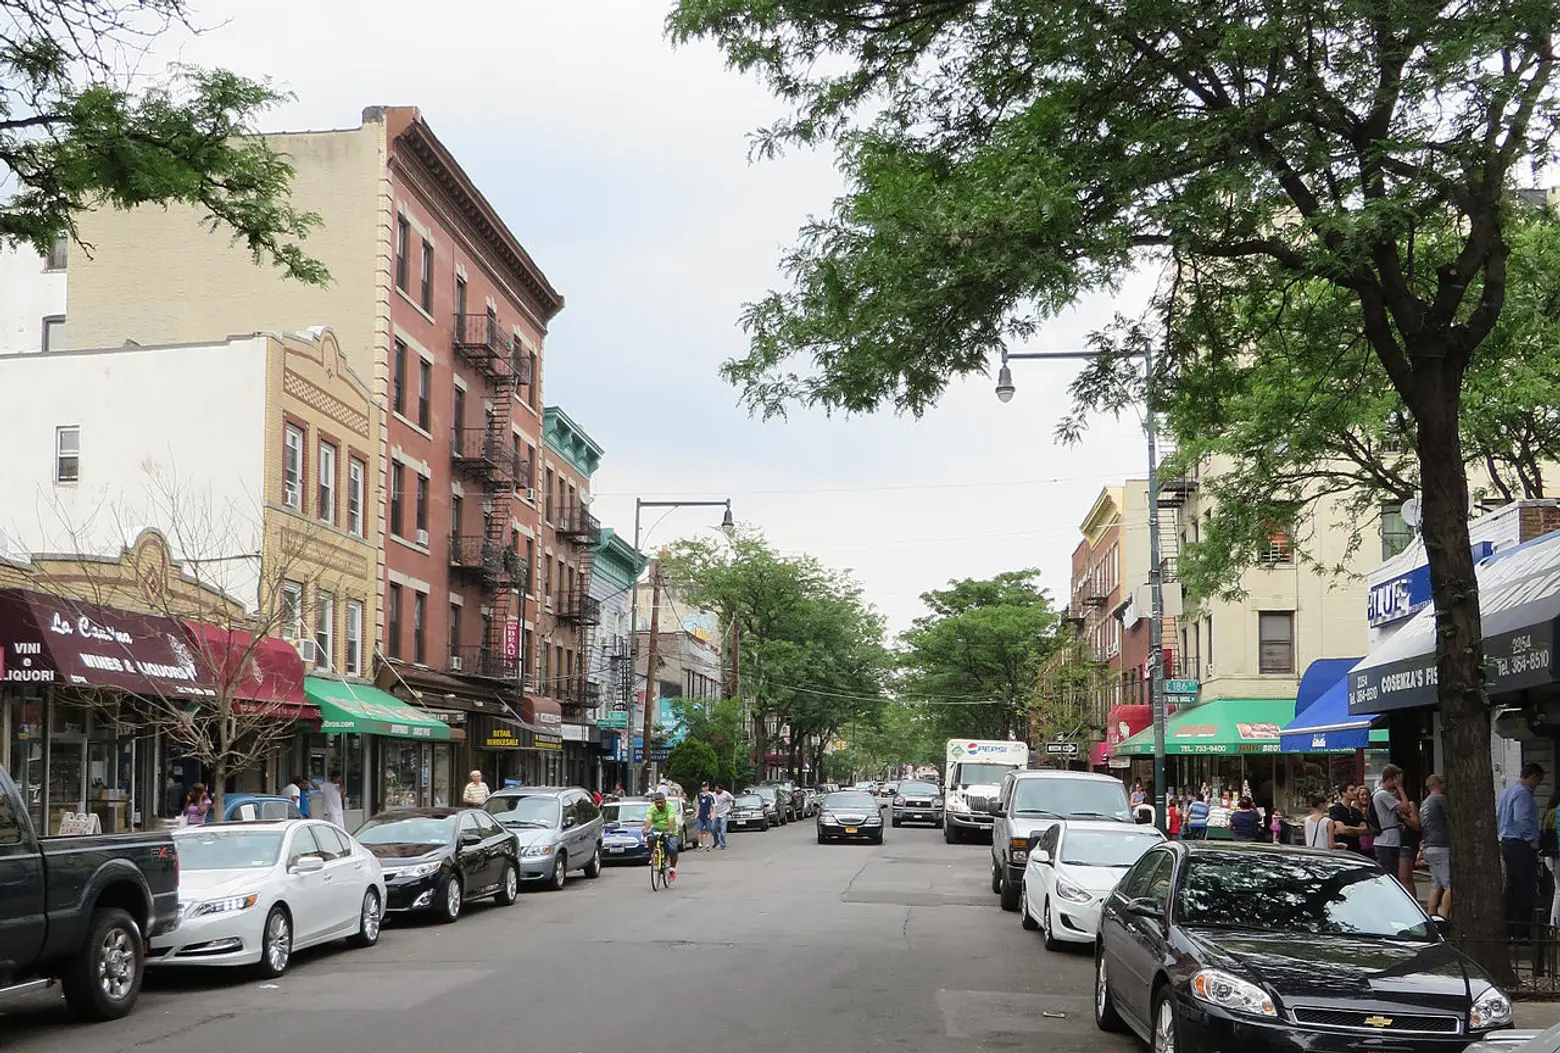 7 Cool Things You Probably Didn’t Know About the Bronx